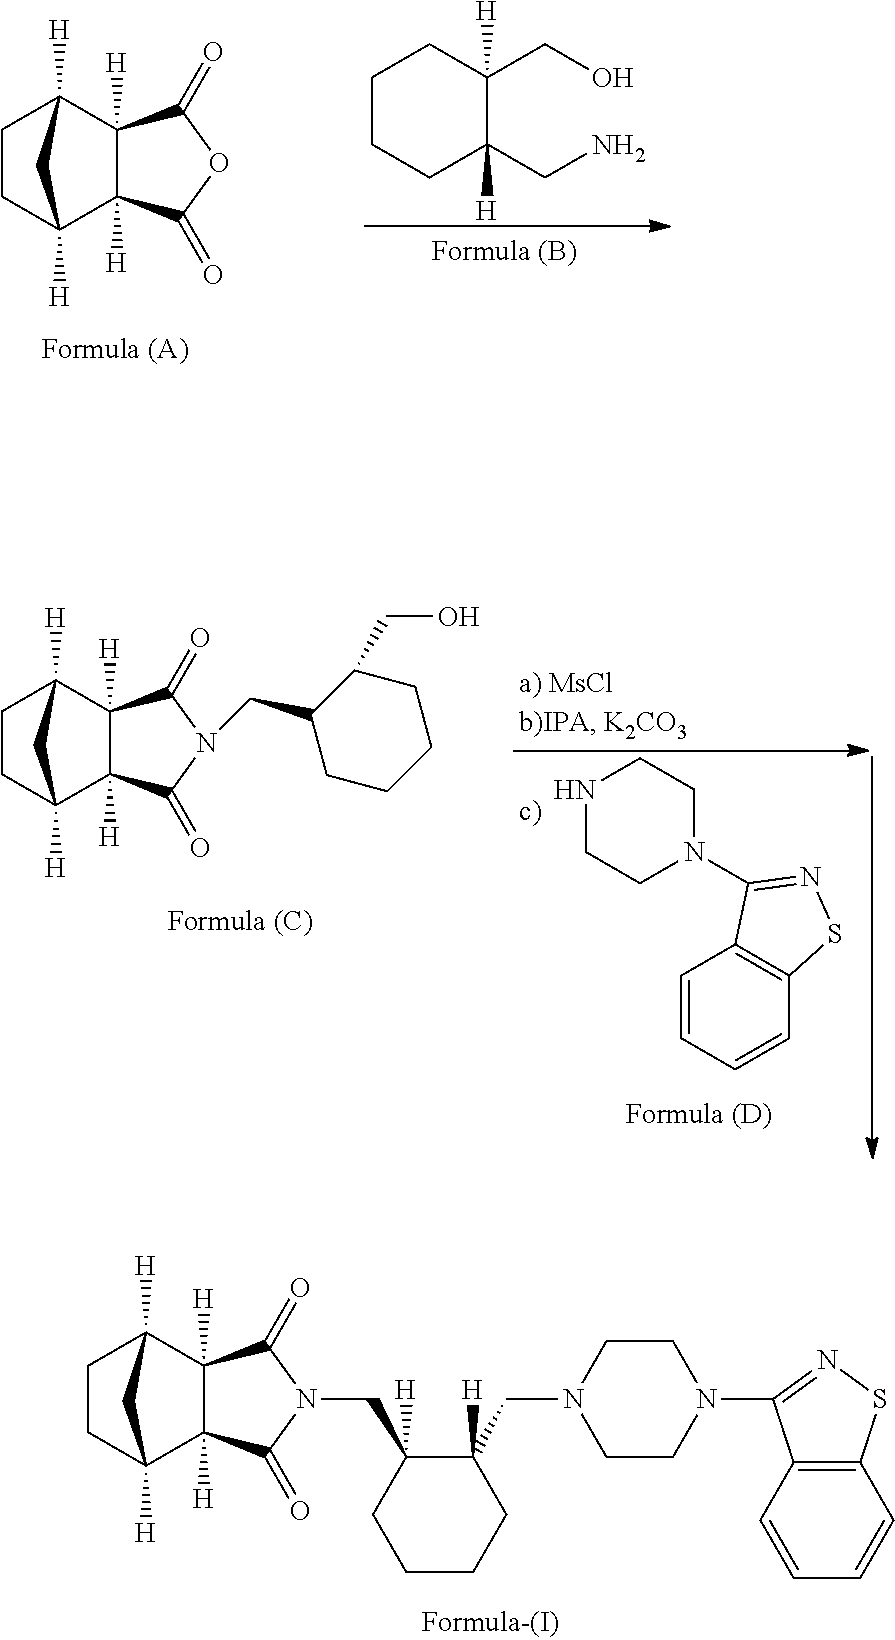 An improved process for the preparation of lurasidone hydrochloride